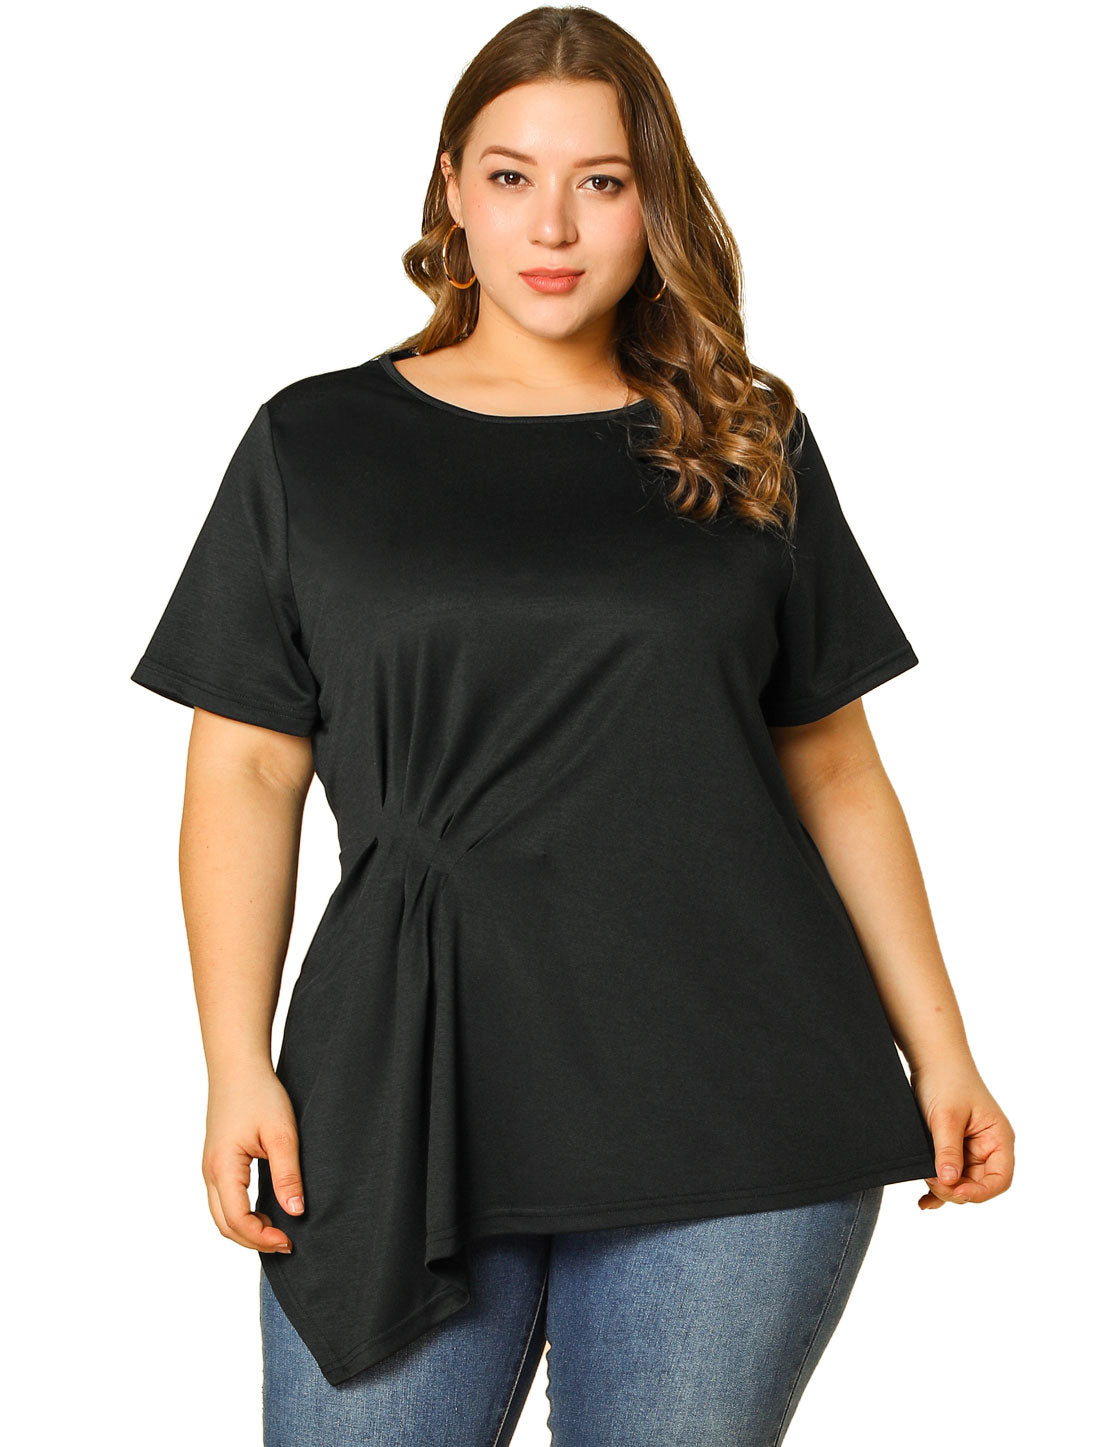 Bublédon Plus Size Top Ruched Summer Blouse Short Sleeve Casual Tops